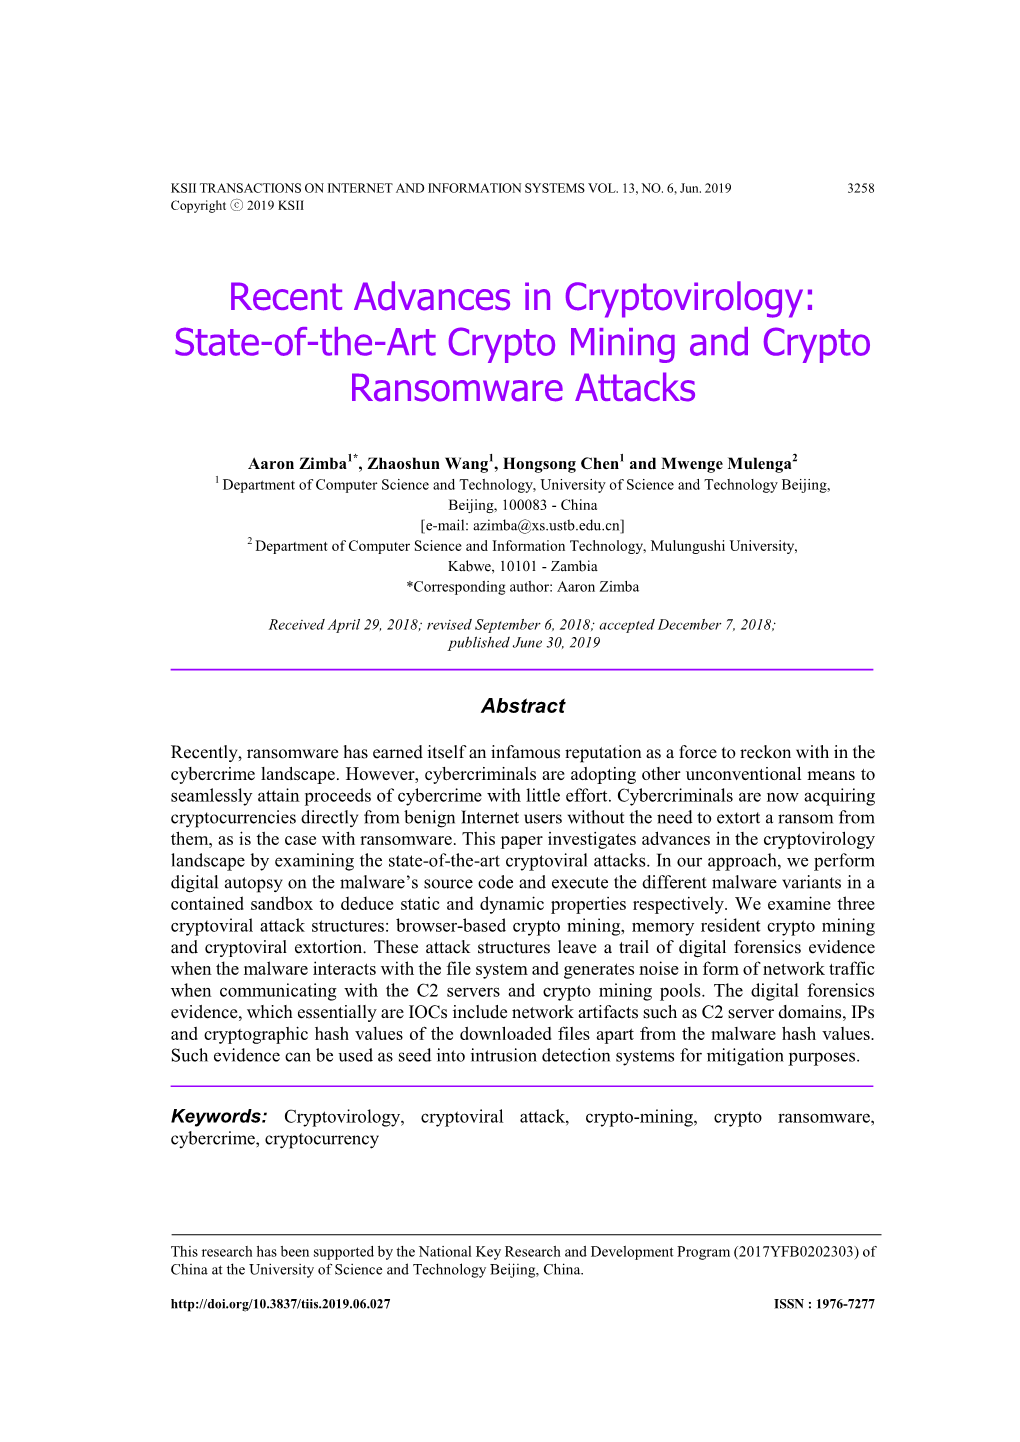 State-Of-The-Art Crypto Mining and Crypto Ransomware Attacks